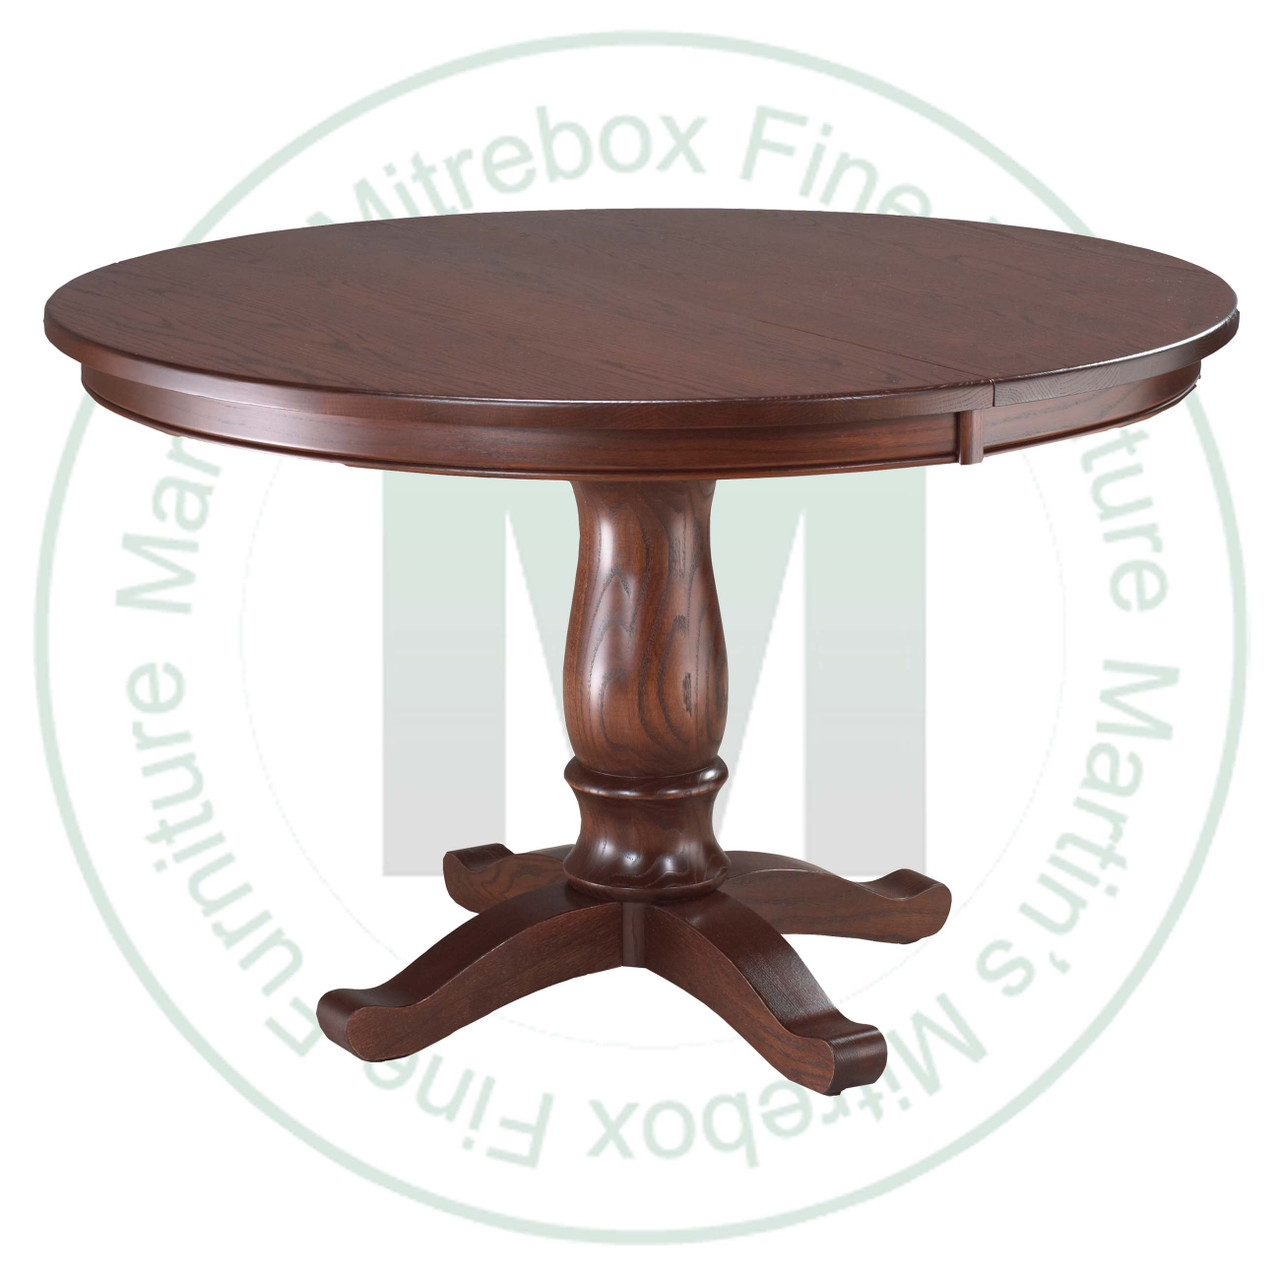 Oak Kimberly Crest Single Pedestal Table 54''D x 54''W x 30''H Round Solid Table. Table Has 1'' Thick Top.